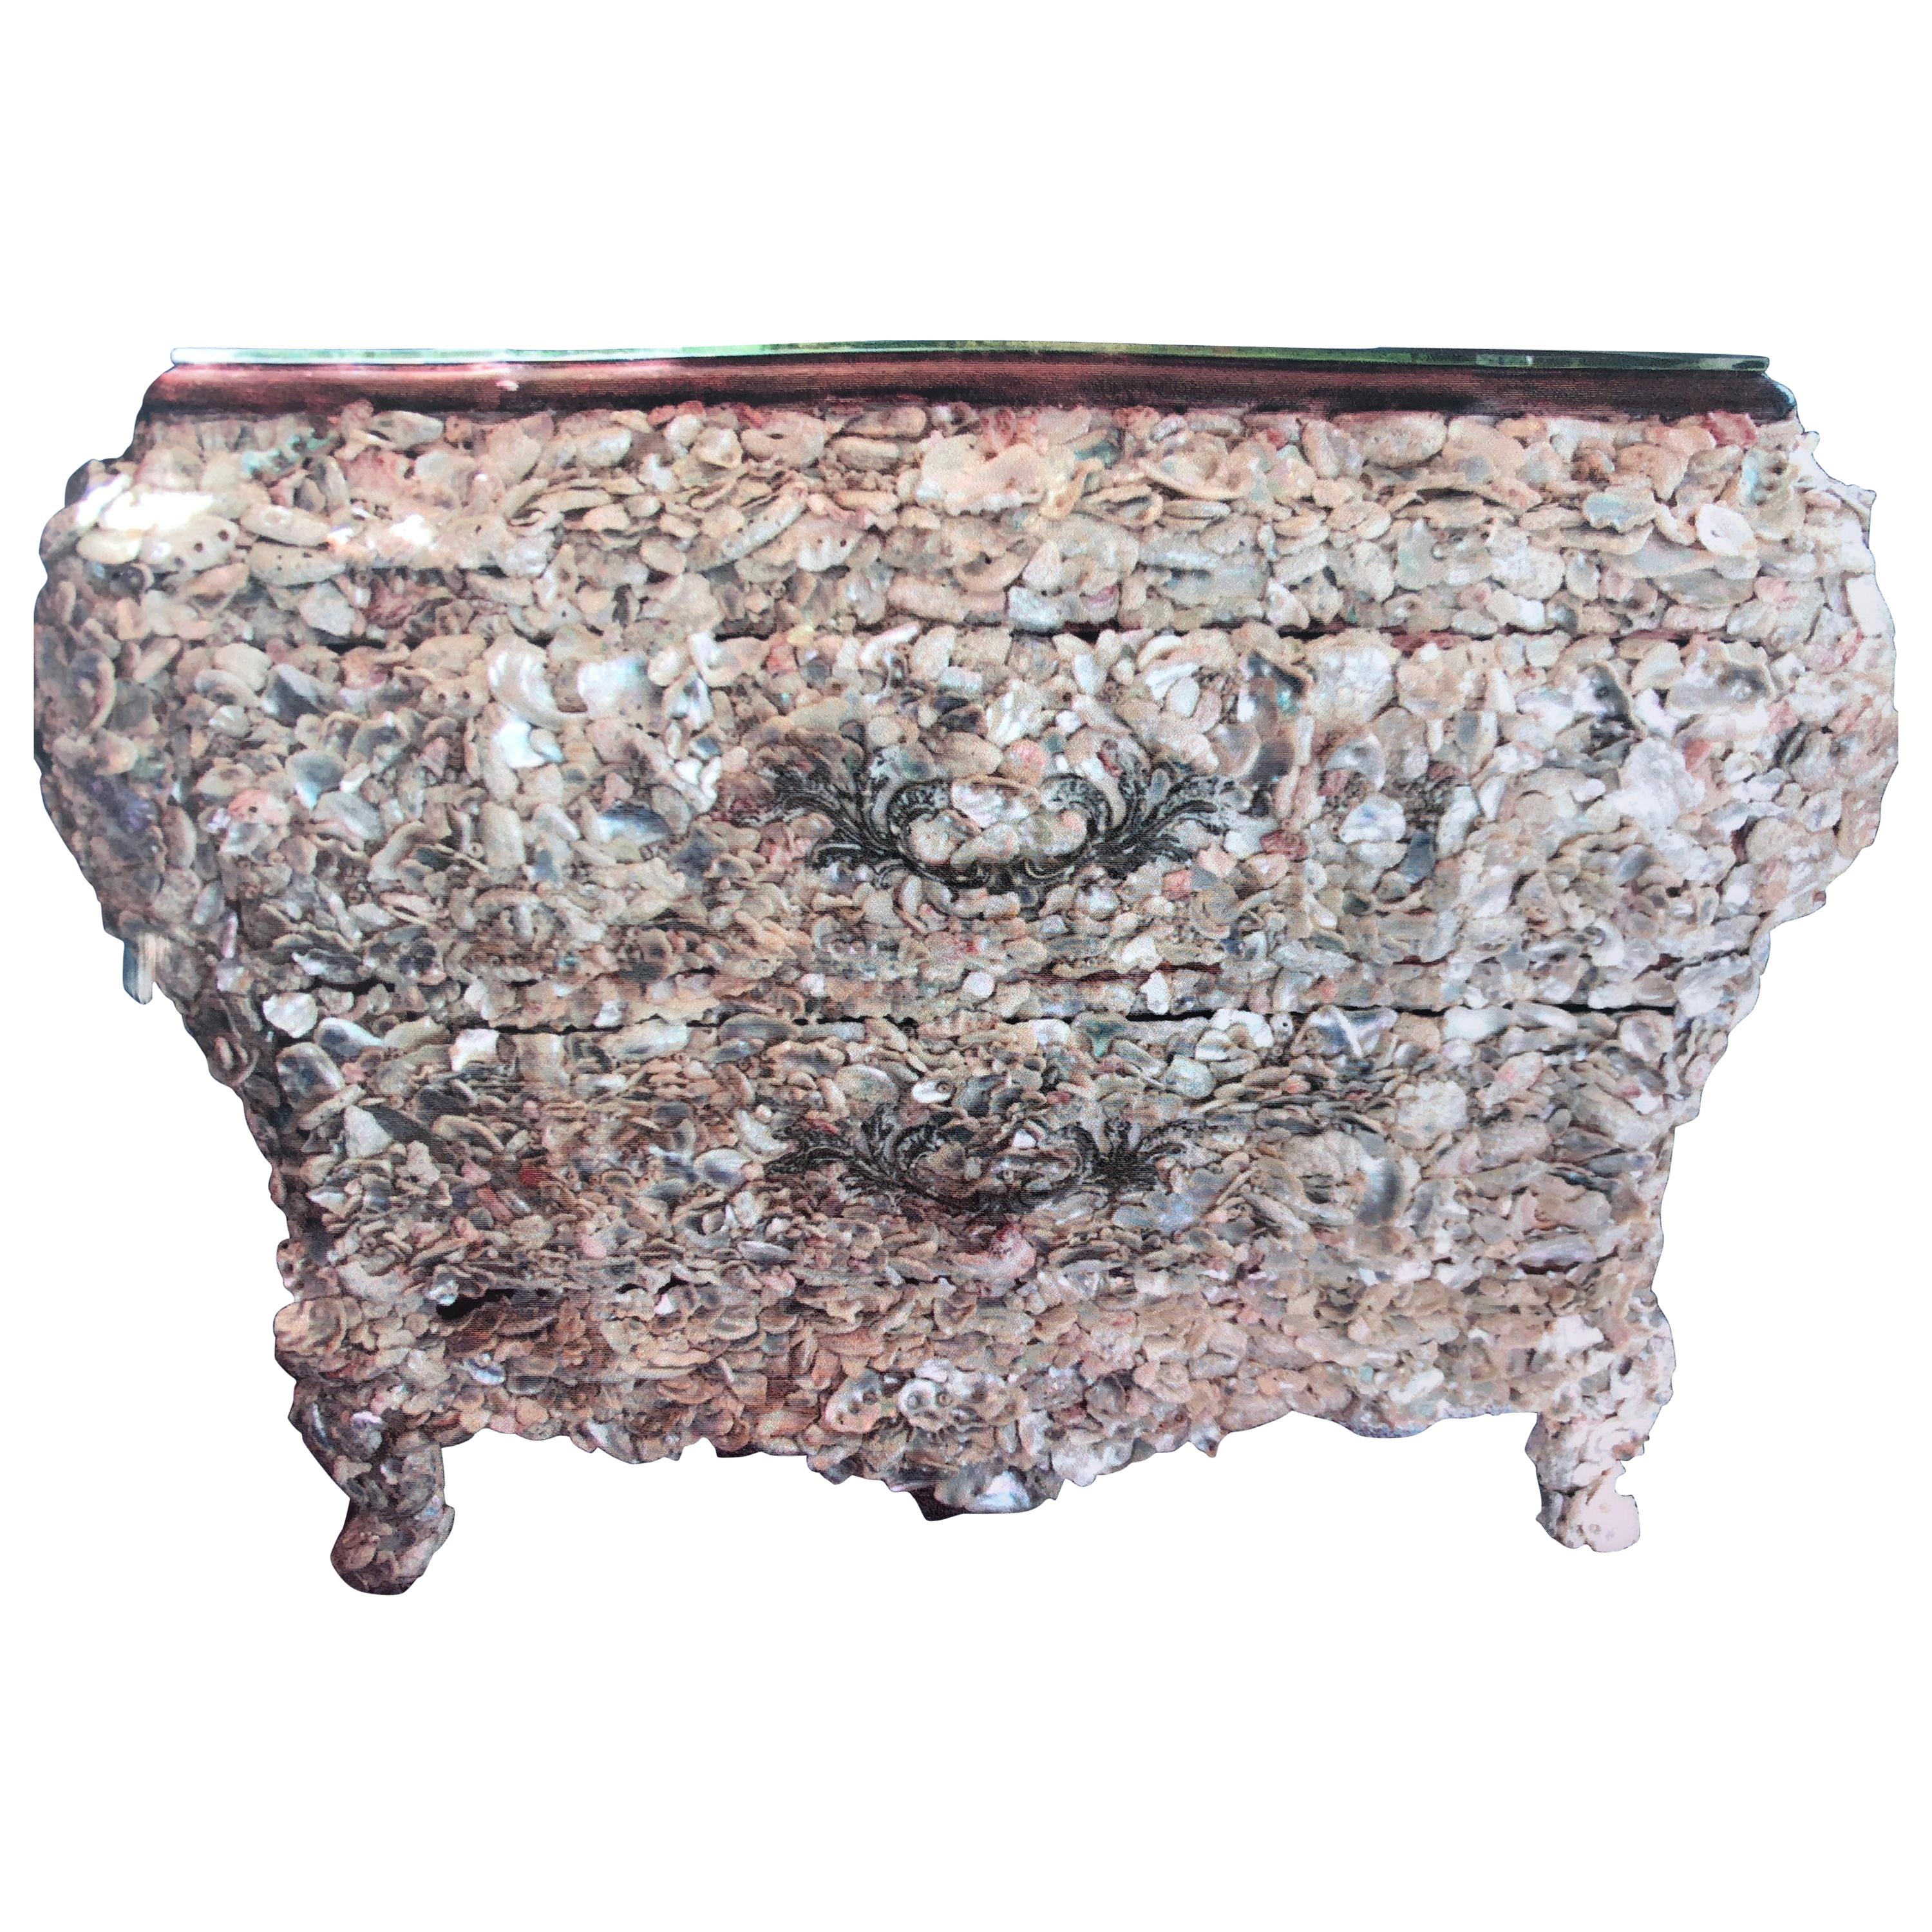 Chaumiere de Coquillage Tables shell commode pair by Patine des Caraibes  For Sale